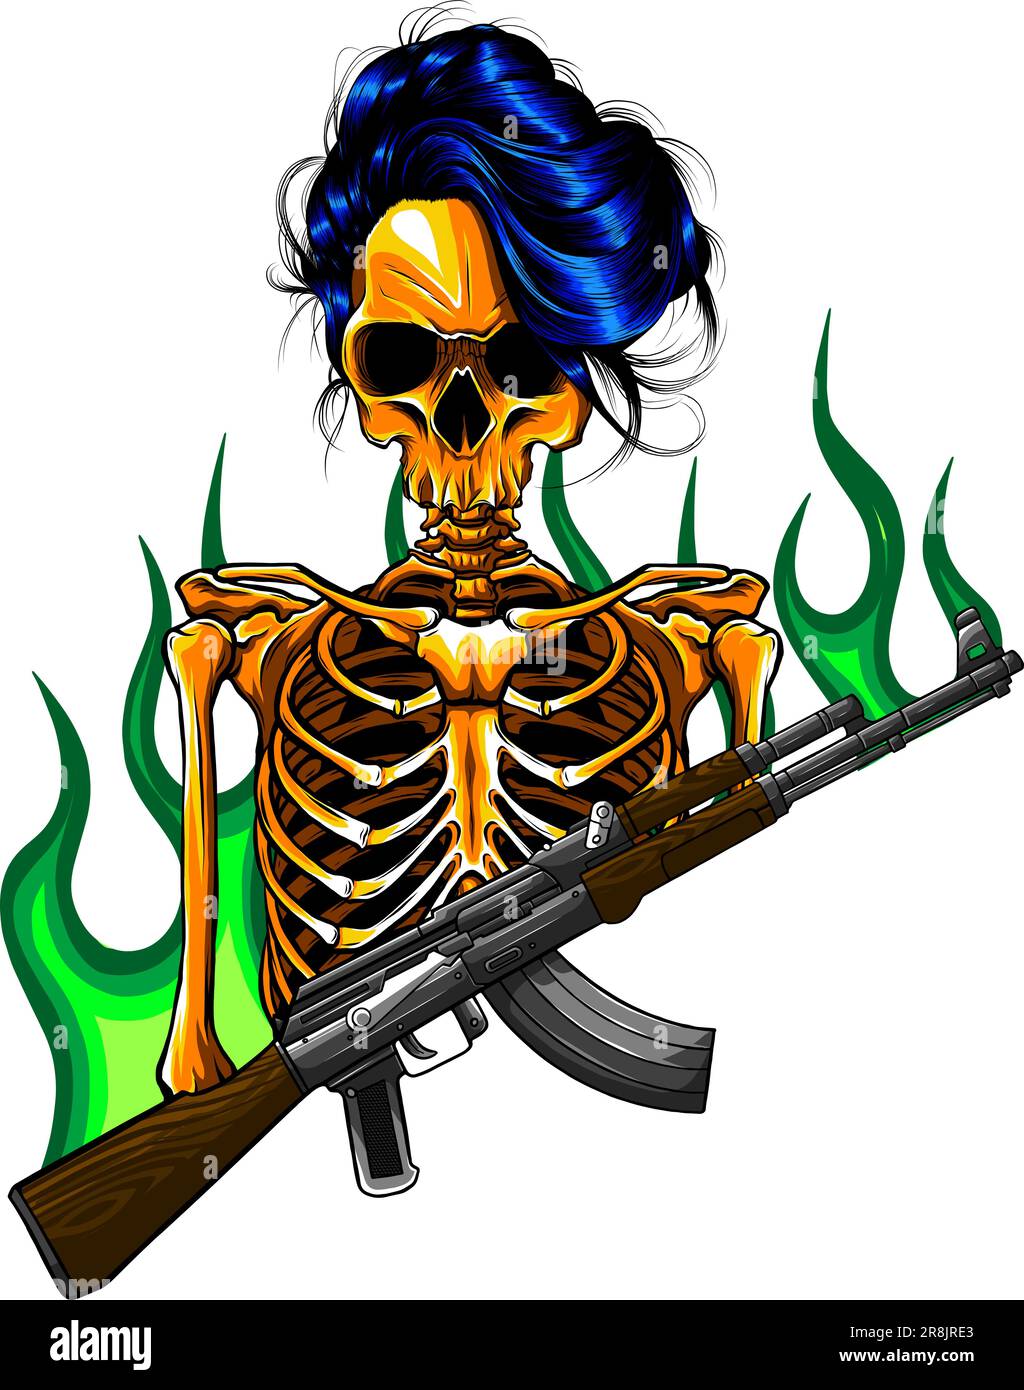 woman Skeleton holding assault rifle with flames vector illustration design on white background Stock Vector